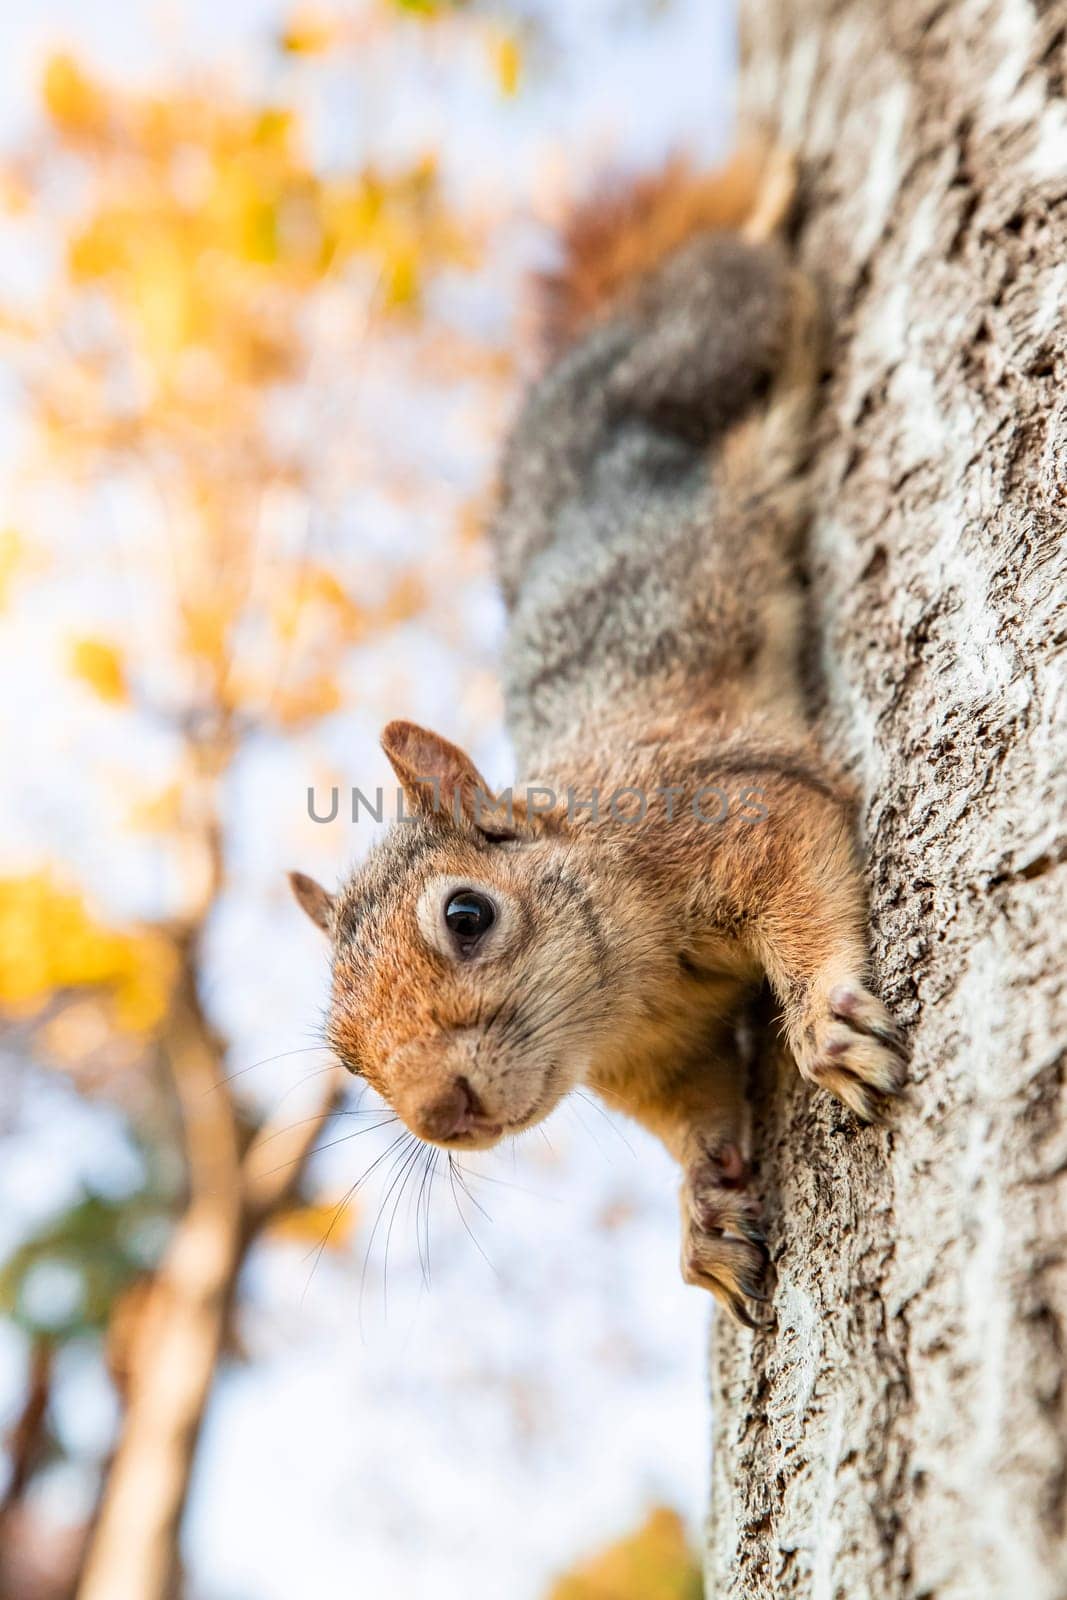 Portrait of fox squirrel (Sciurus niger) sitting on branch isolated on green. Holds foreleg with nut on chest. Urban wildlife.